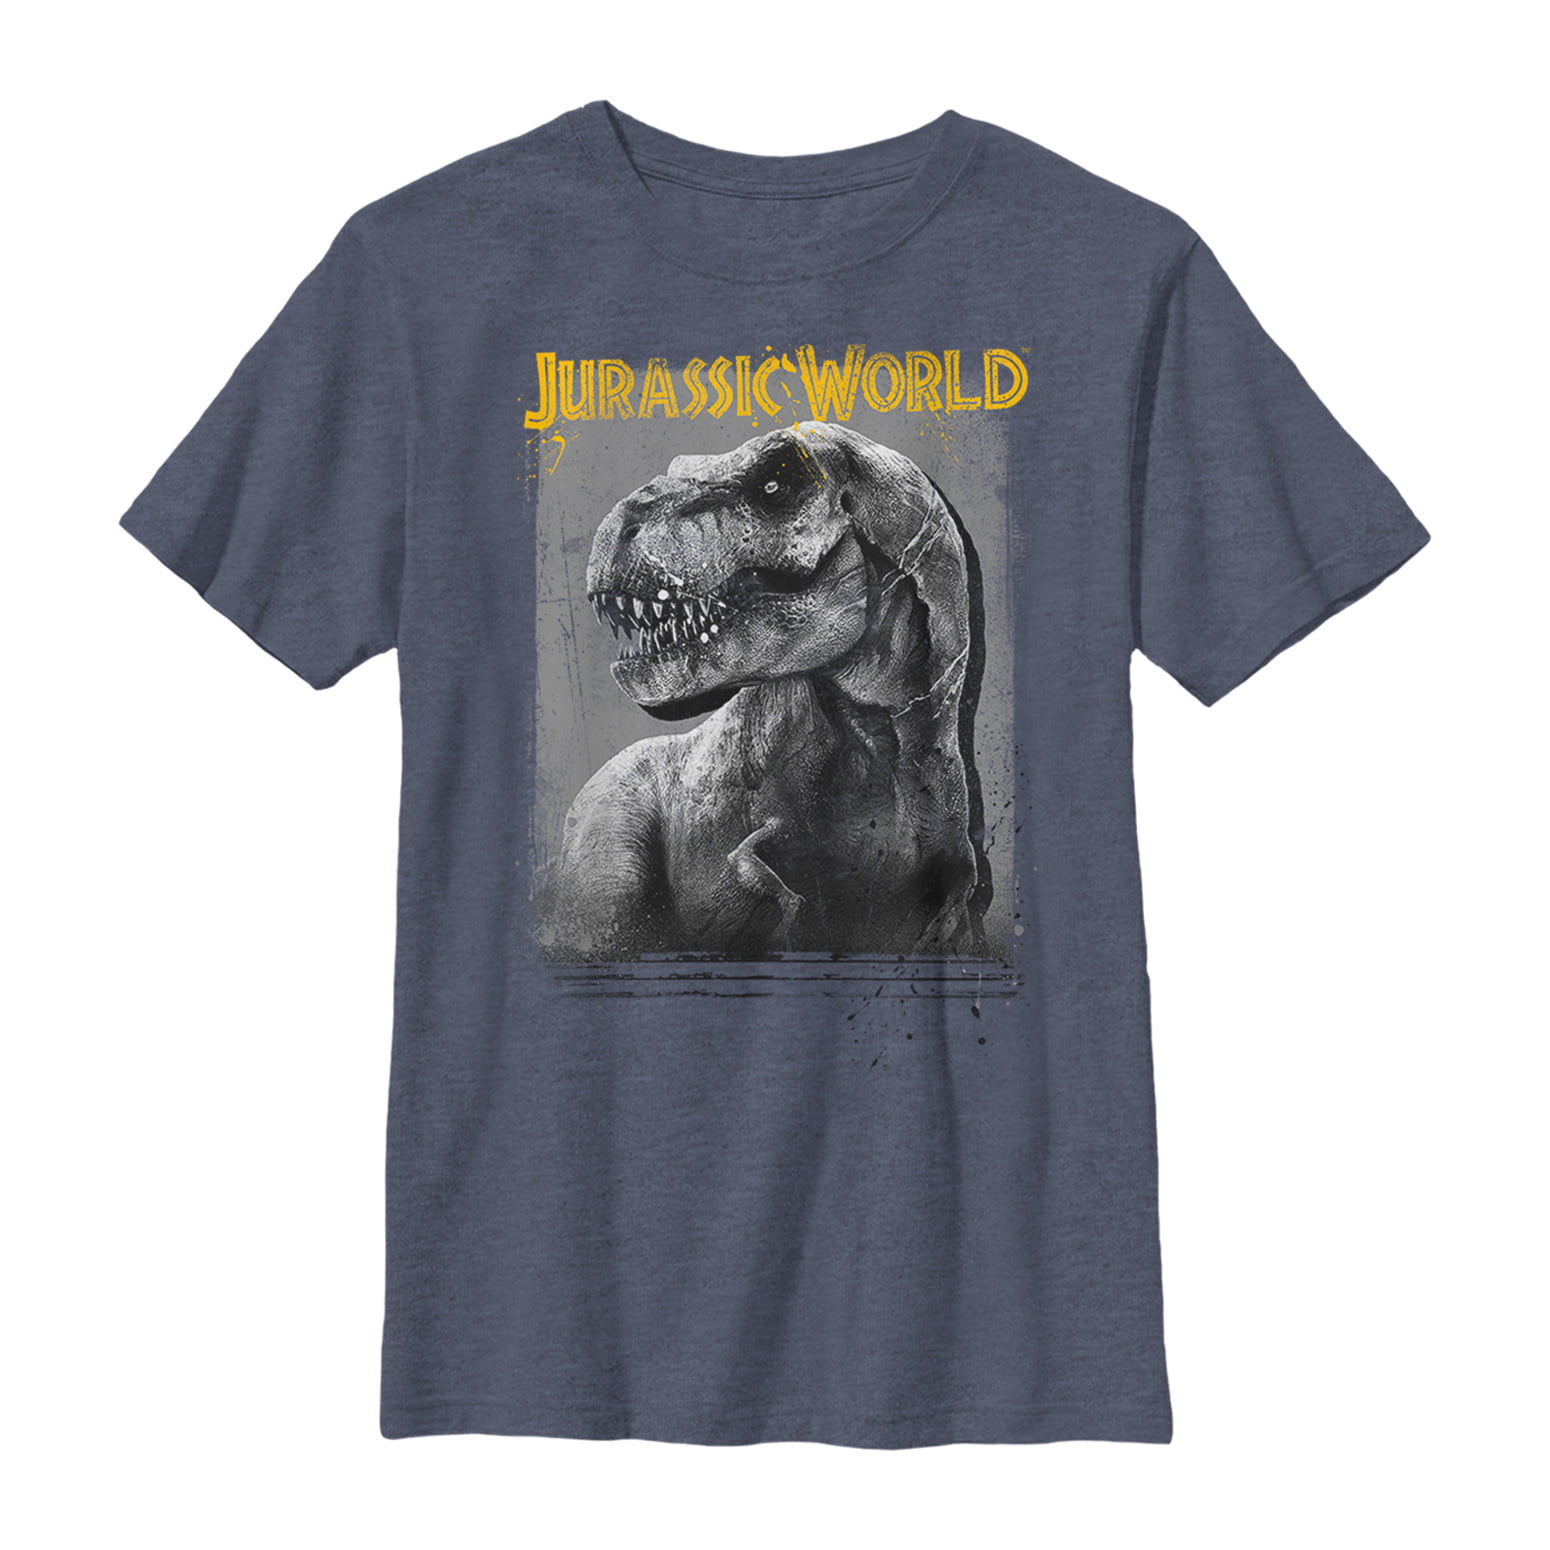 JURASSIC PARK WORLD T-REX Active Poly Tee T-Shirt NWT Boys Size 4 6 or 7  $15 